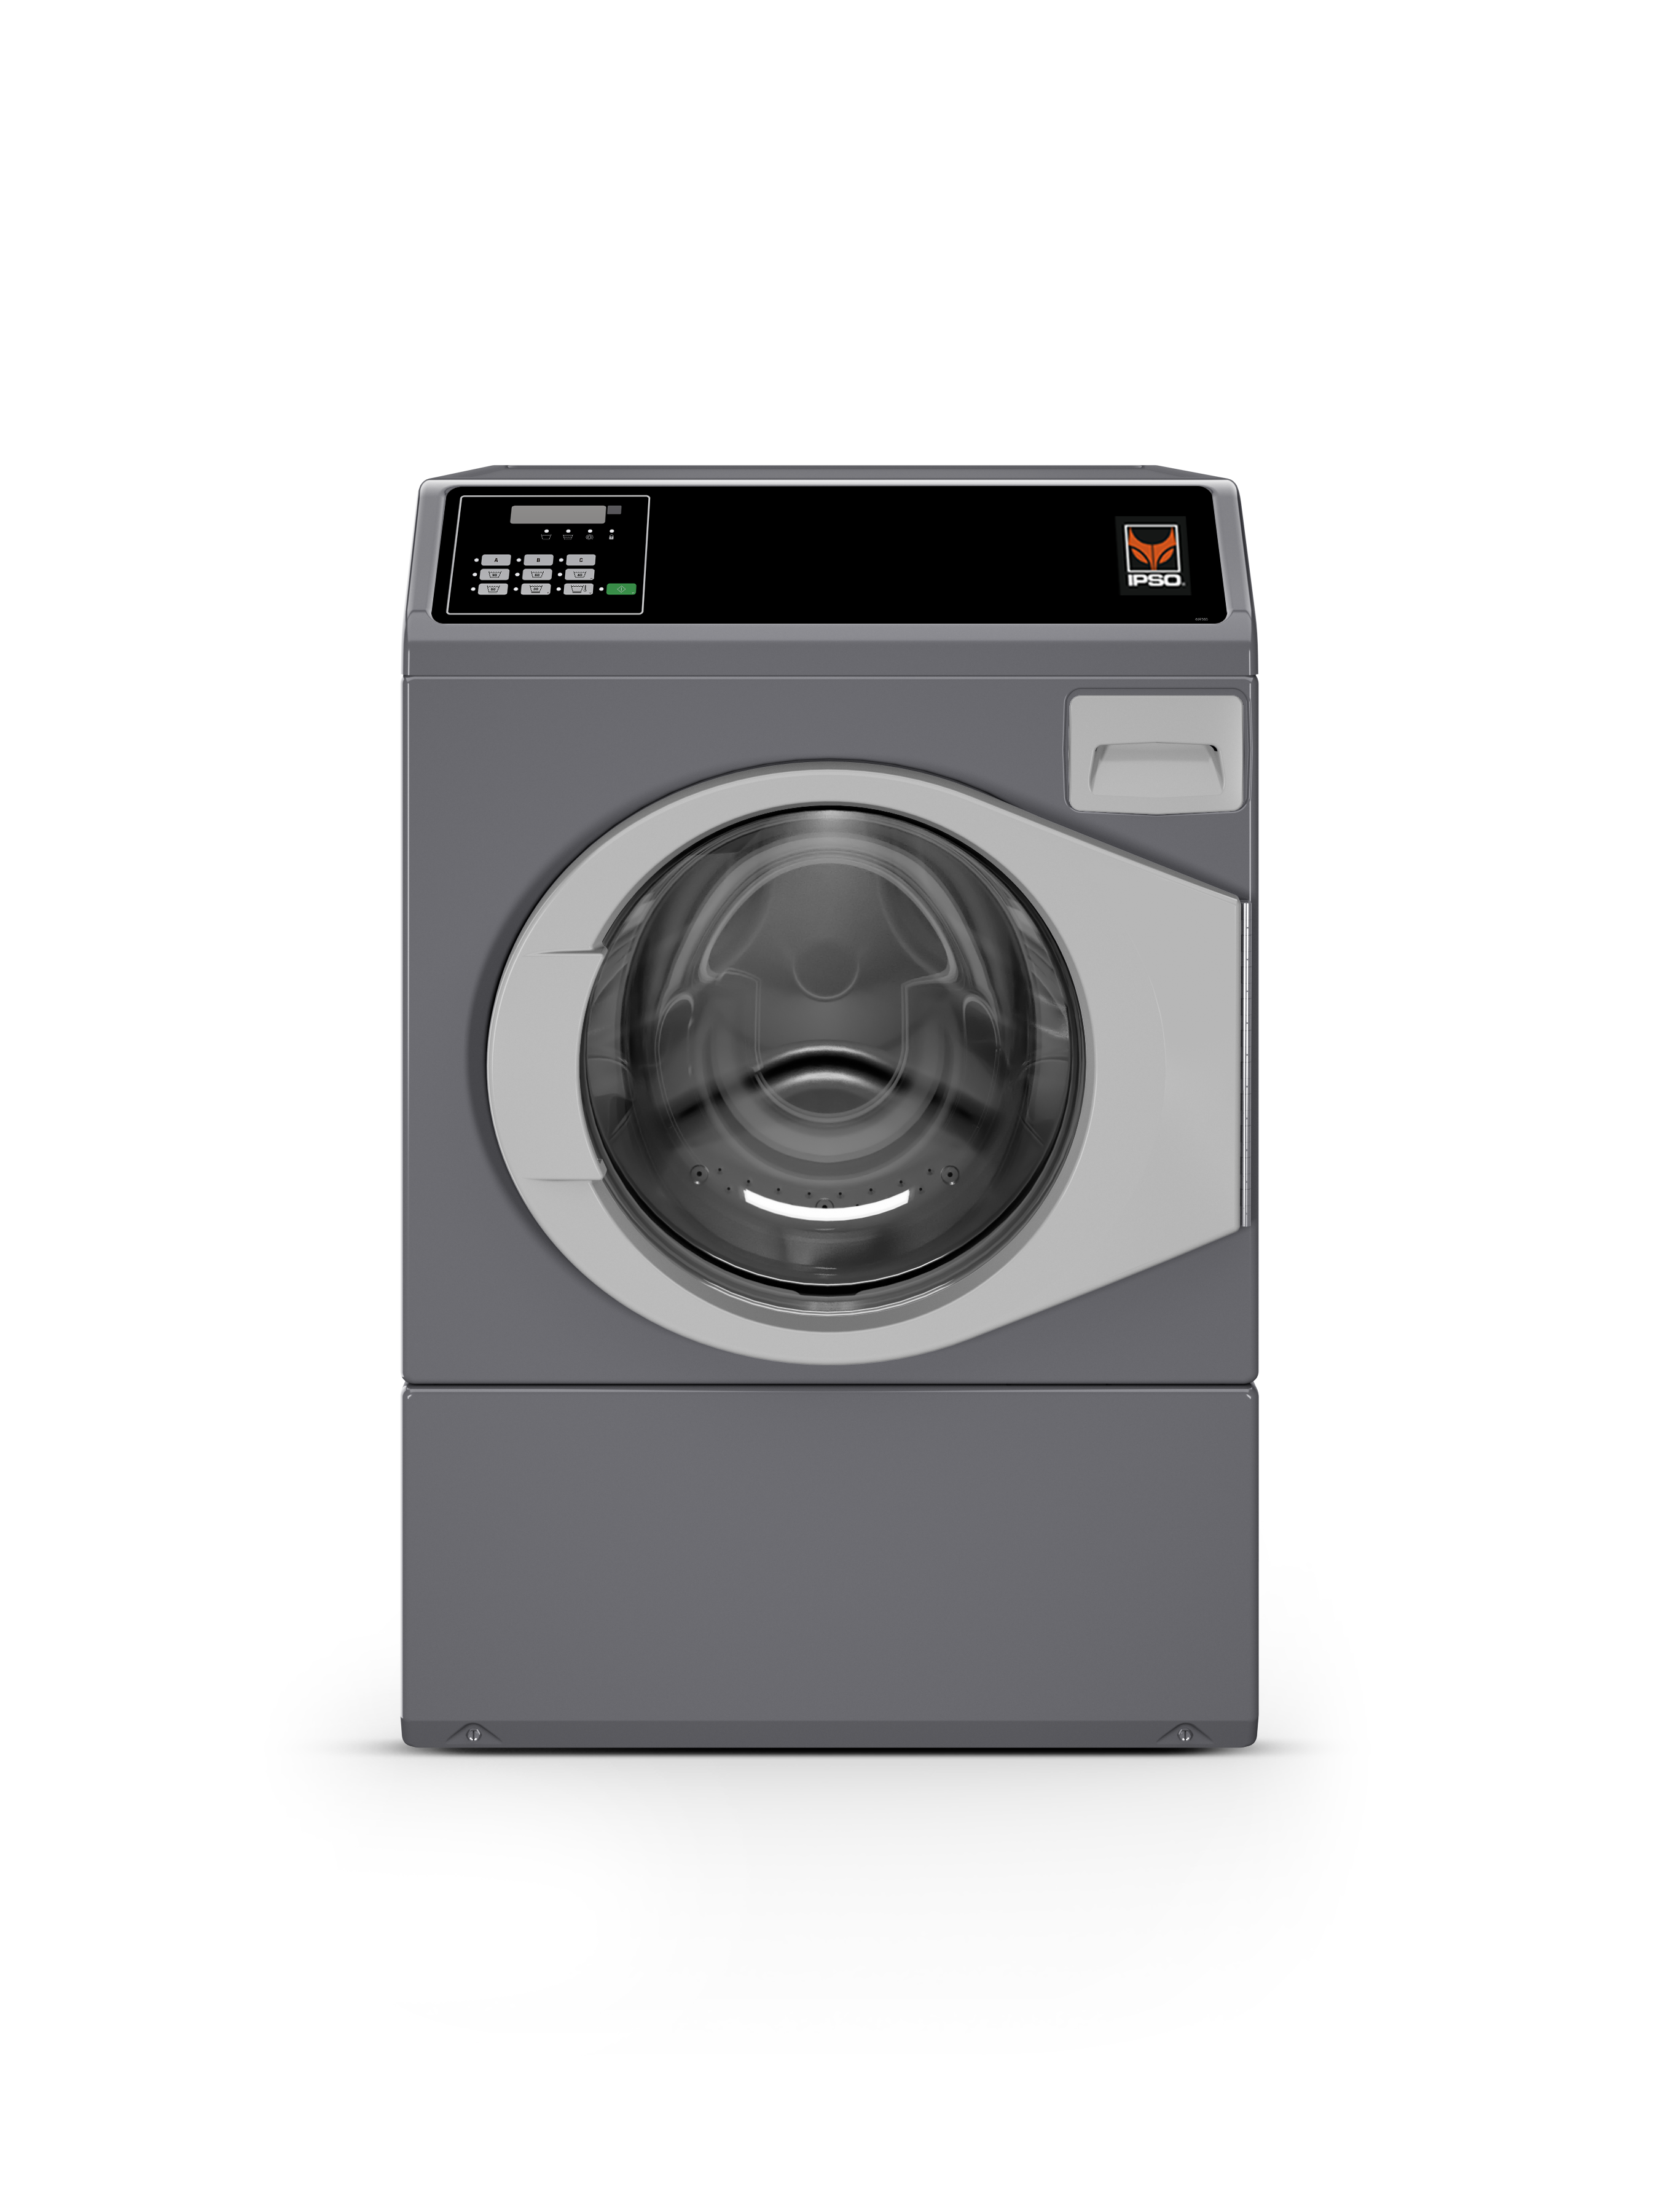 IPSO CW10 semi-commercial / commercial front-load washing machine